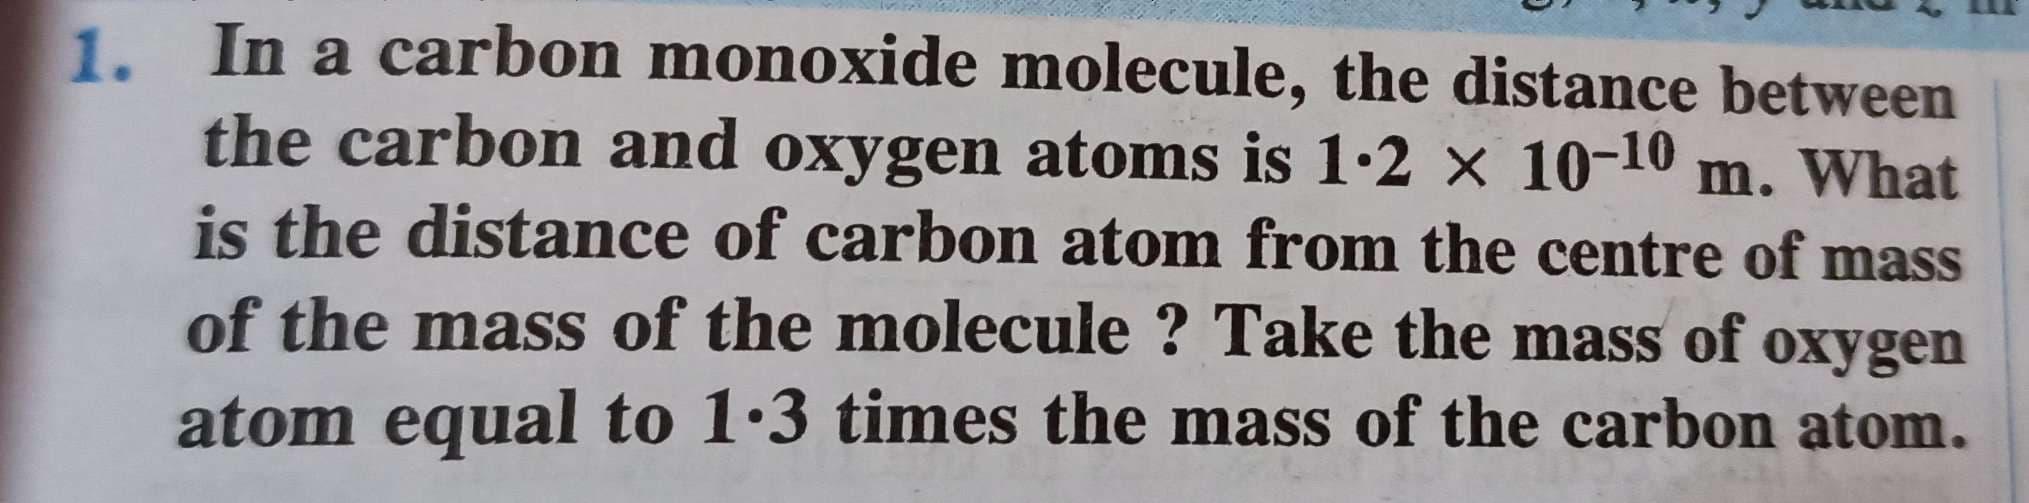 In a carbon monoxide molecule, the distance between
the carbon and oxygen atoms is 1.2 × 10-10 m. What
is the distance of carbon atom from the centre of mass
of the mass of the molecule ? Take the mass of oxygen
atom equal to 1·3 times the mass of the carbon atom.
